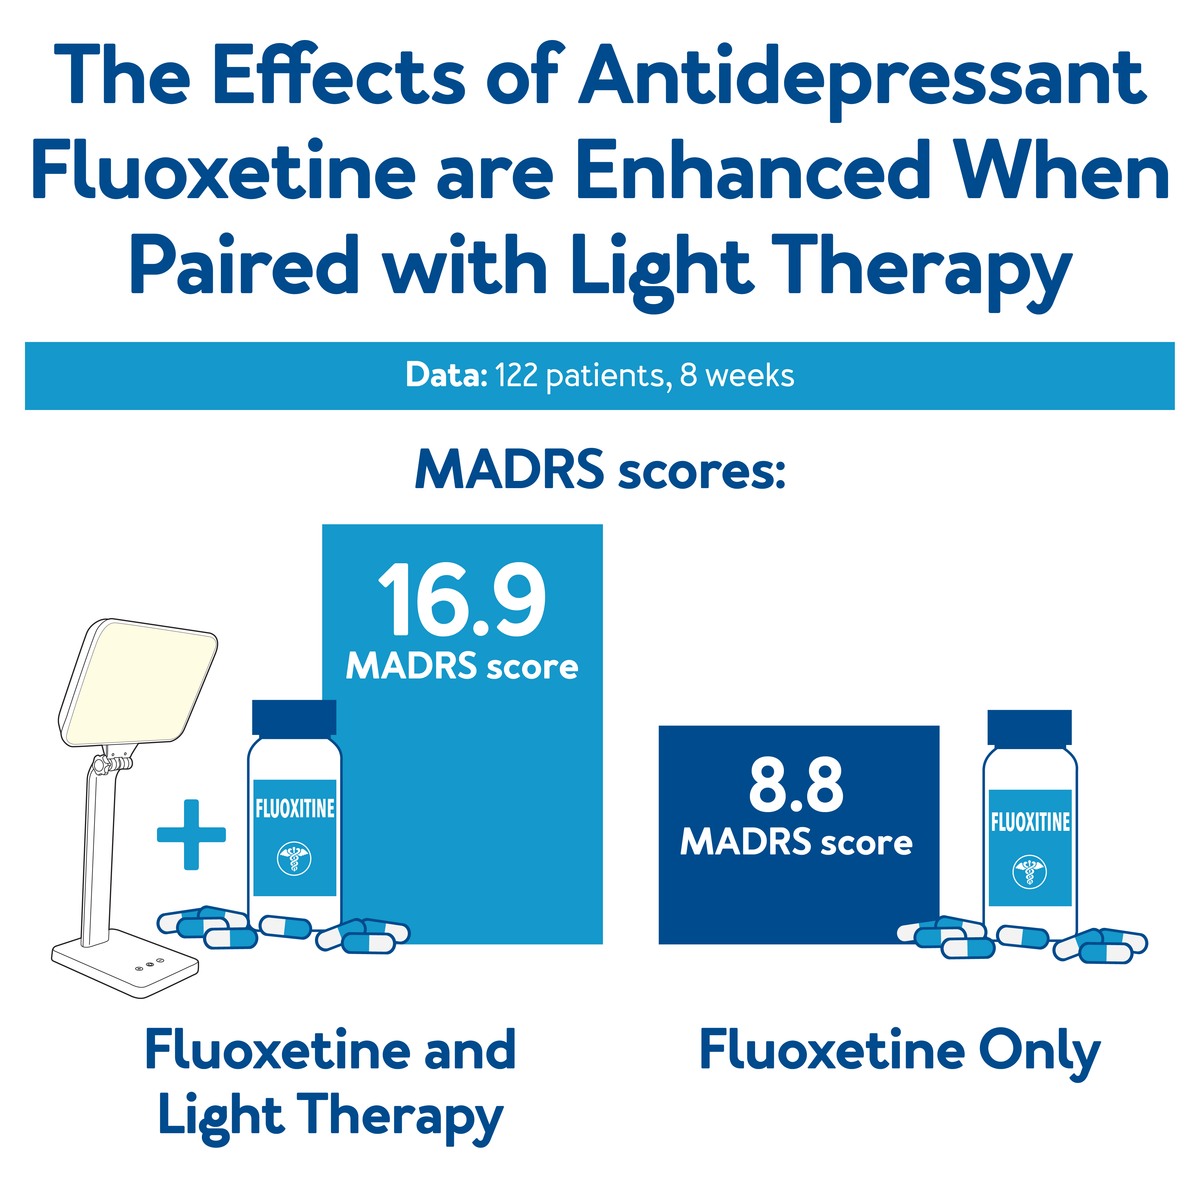 The Effects of Antidepressant Fluoxetine, further details are provided below.